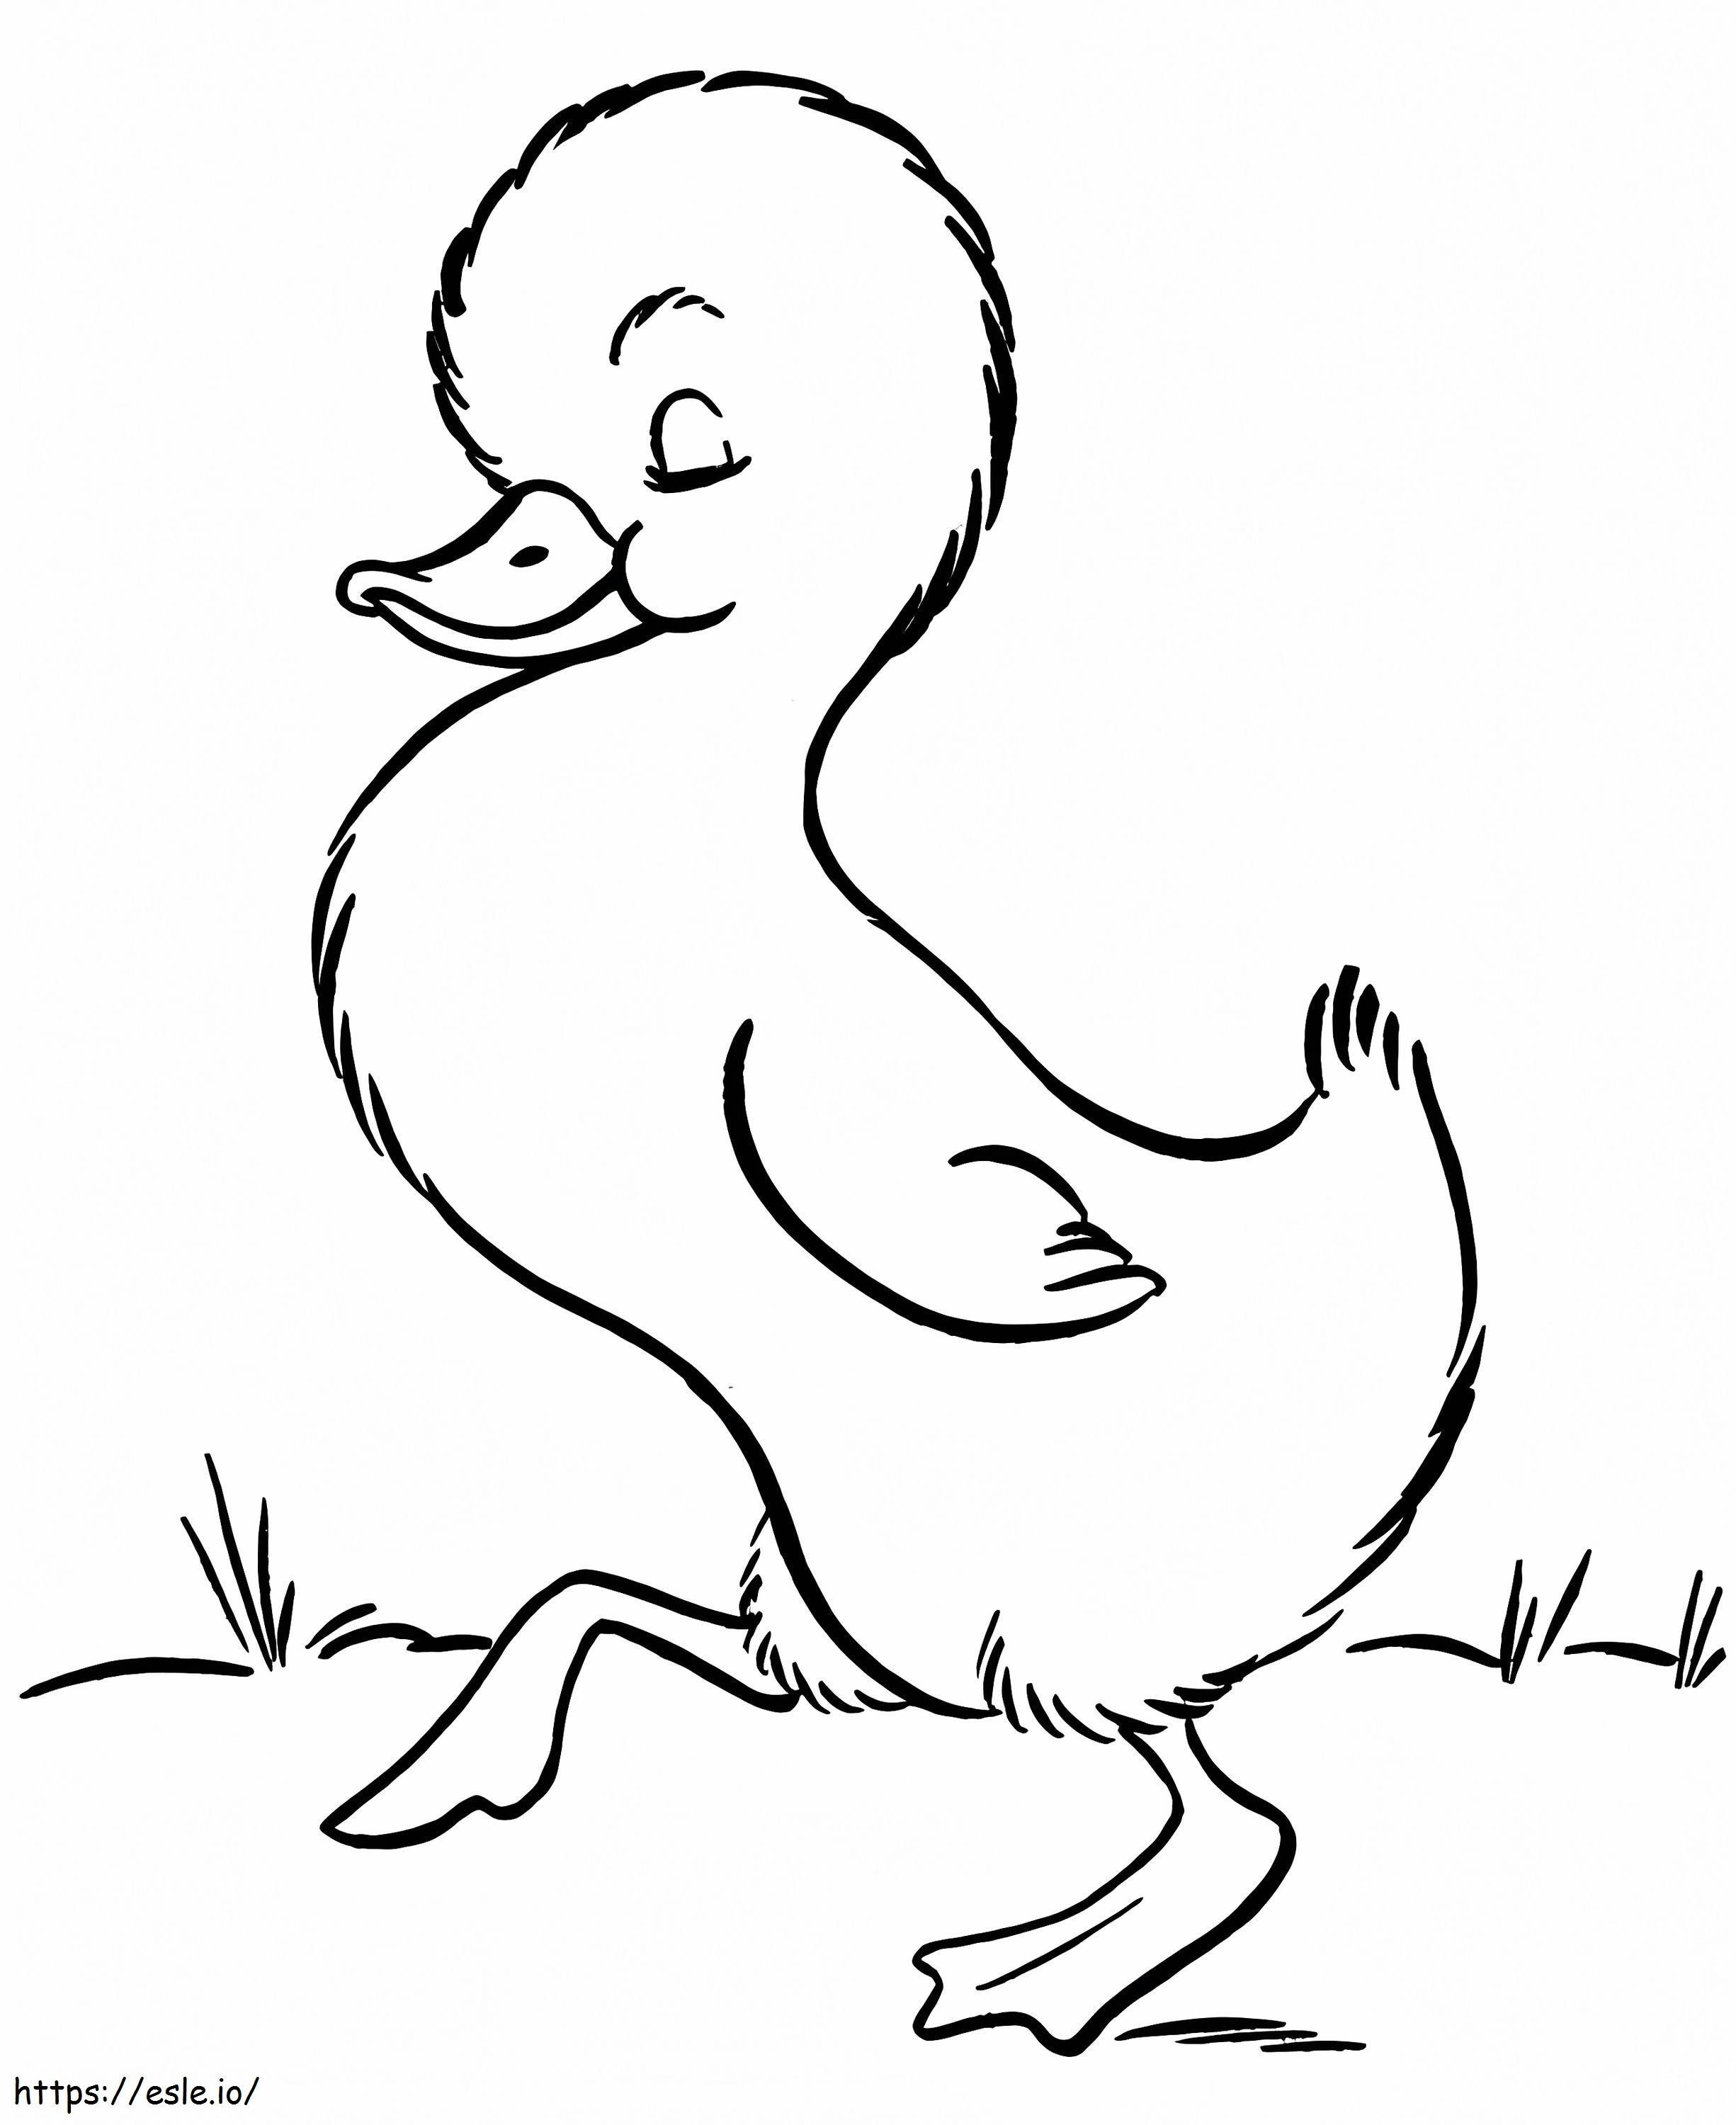 Duckling Walking coloring page